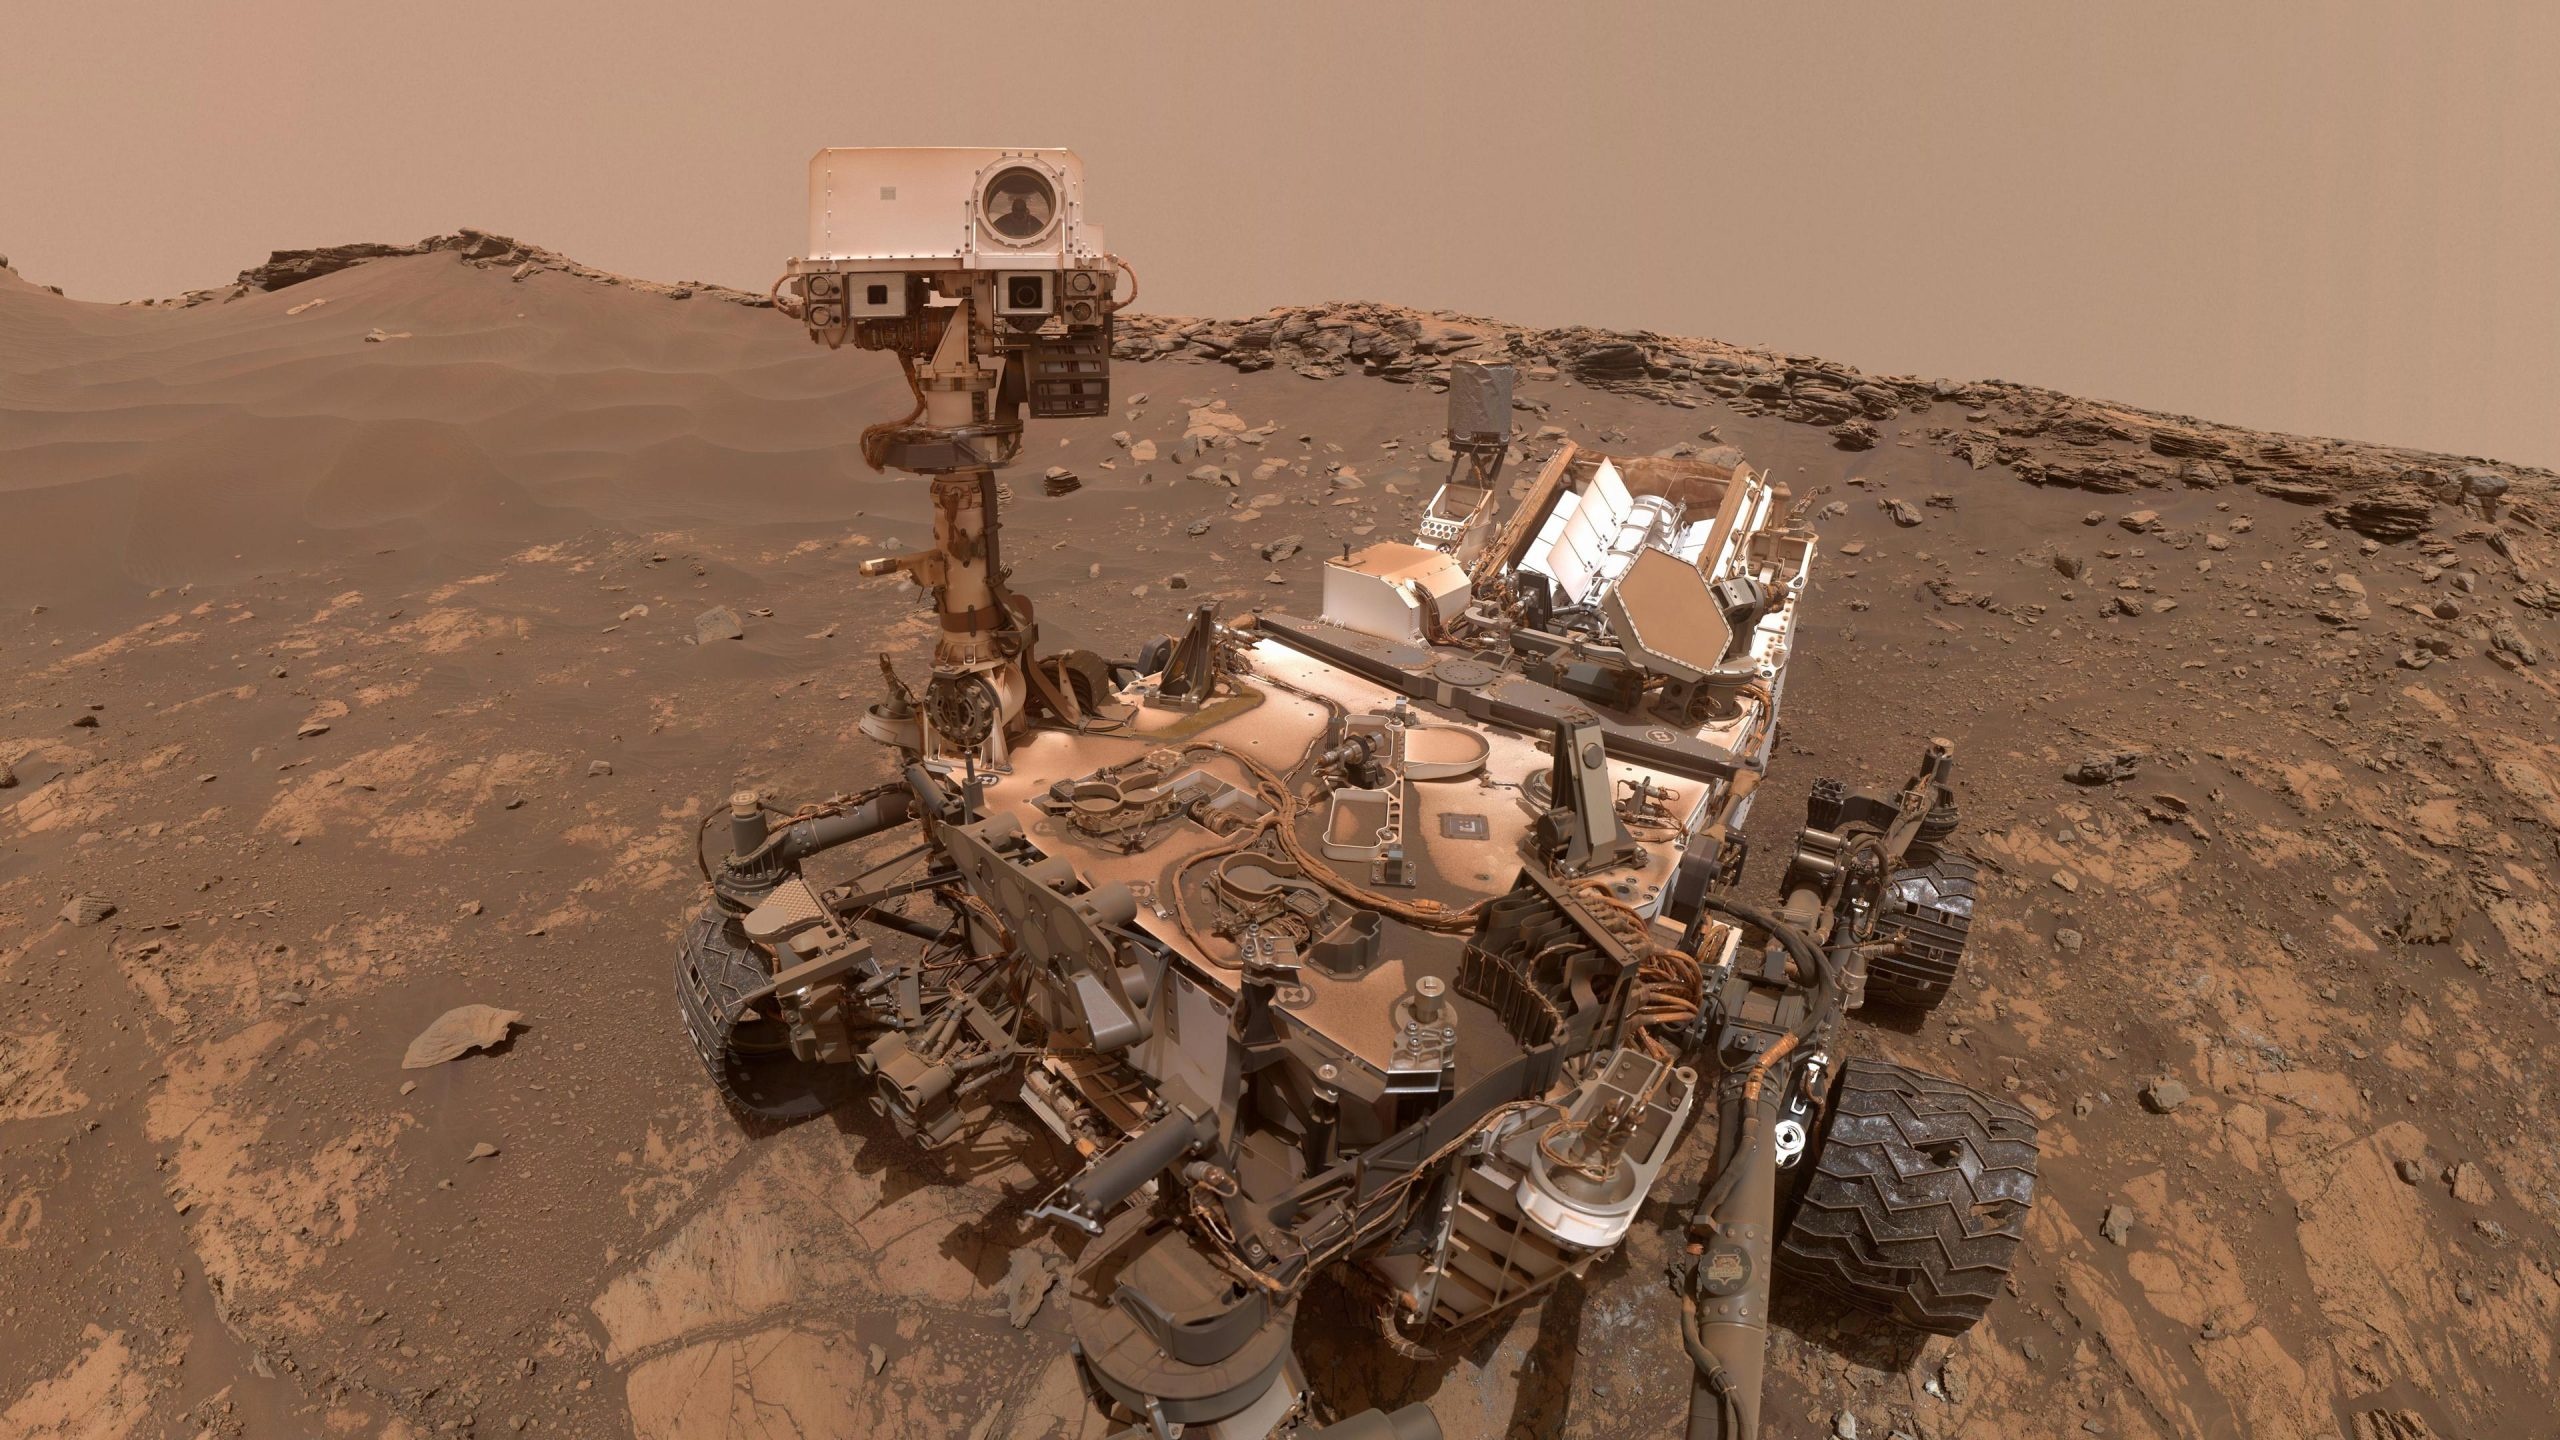 Curiosity rover project, Planetary geologist, Mars ground truth, Searching, 2560x1440 HD Desktop